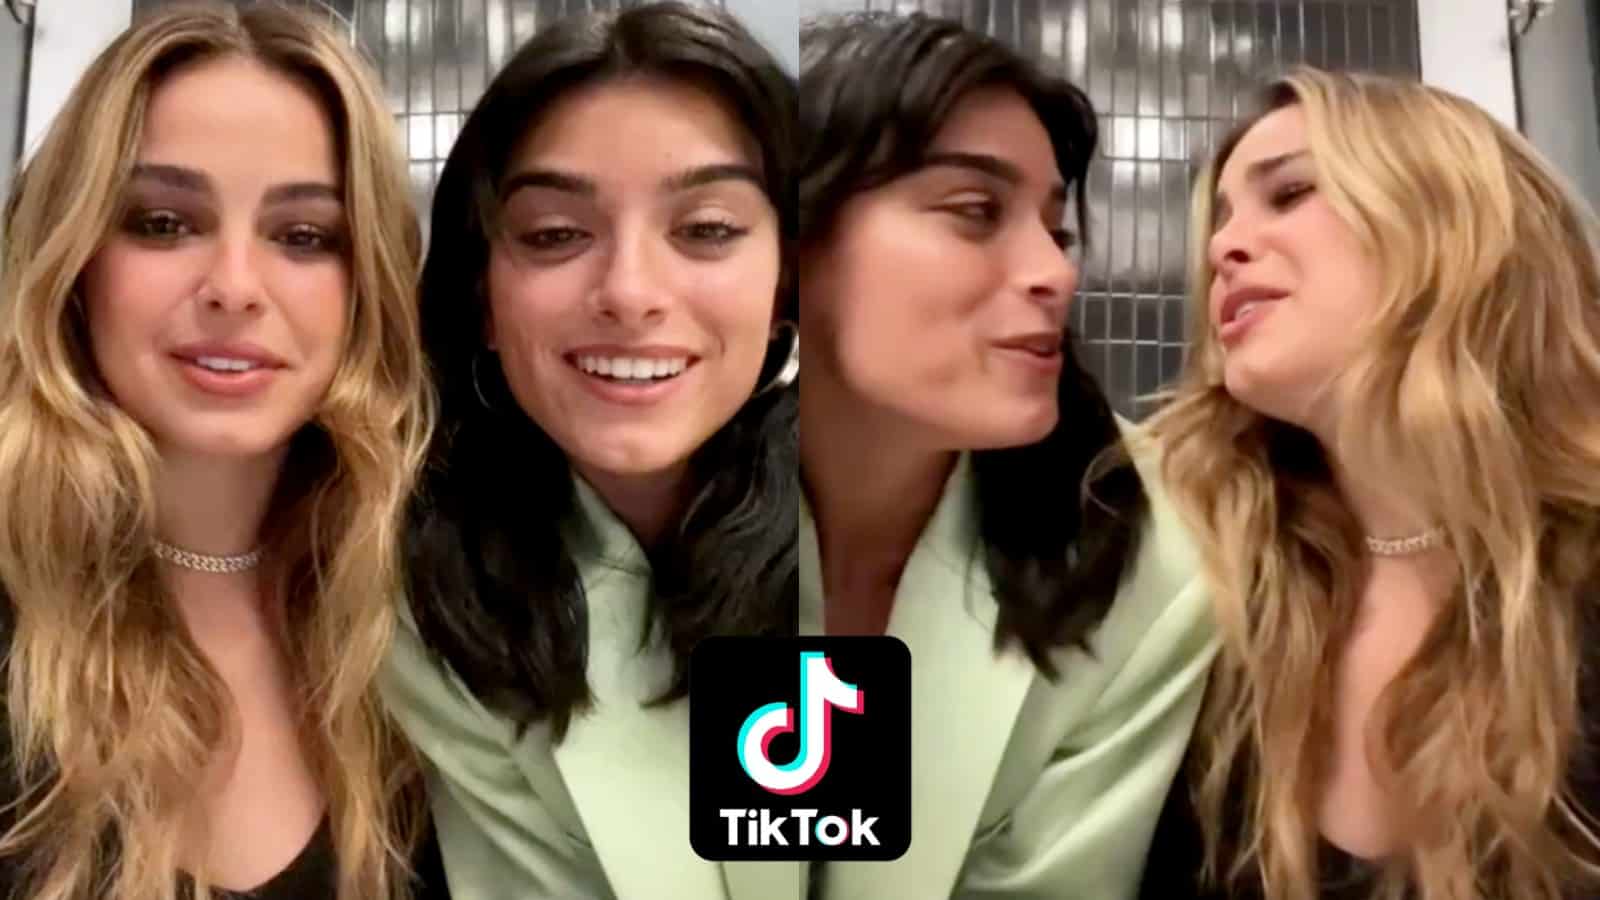 Addison Rae and Dixie D'Amelio use the inverted filter on TikTok